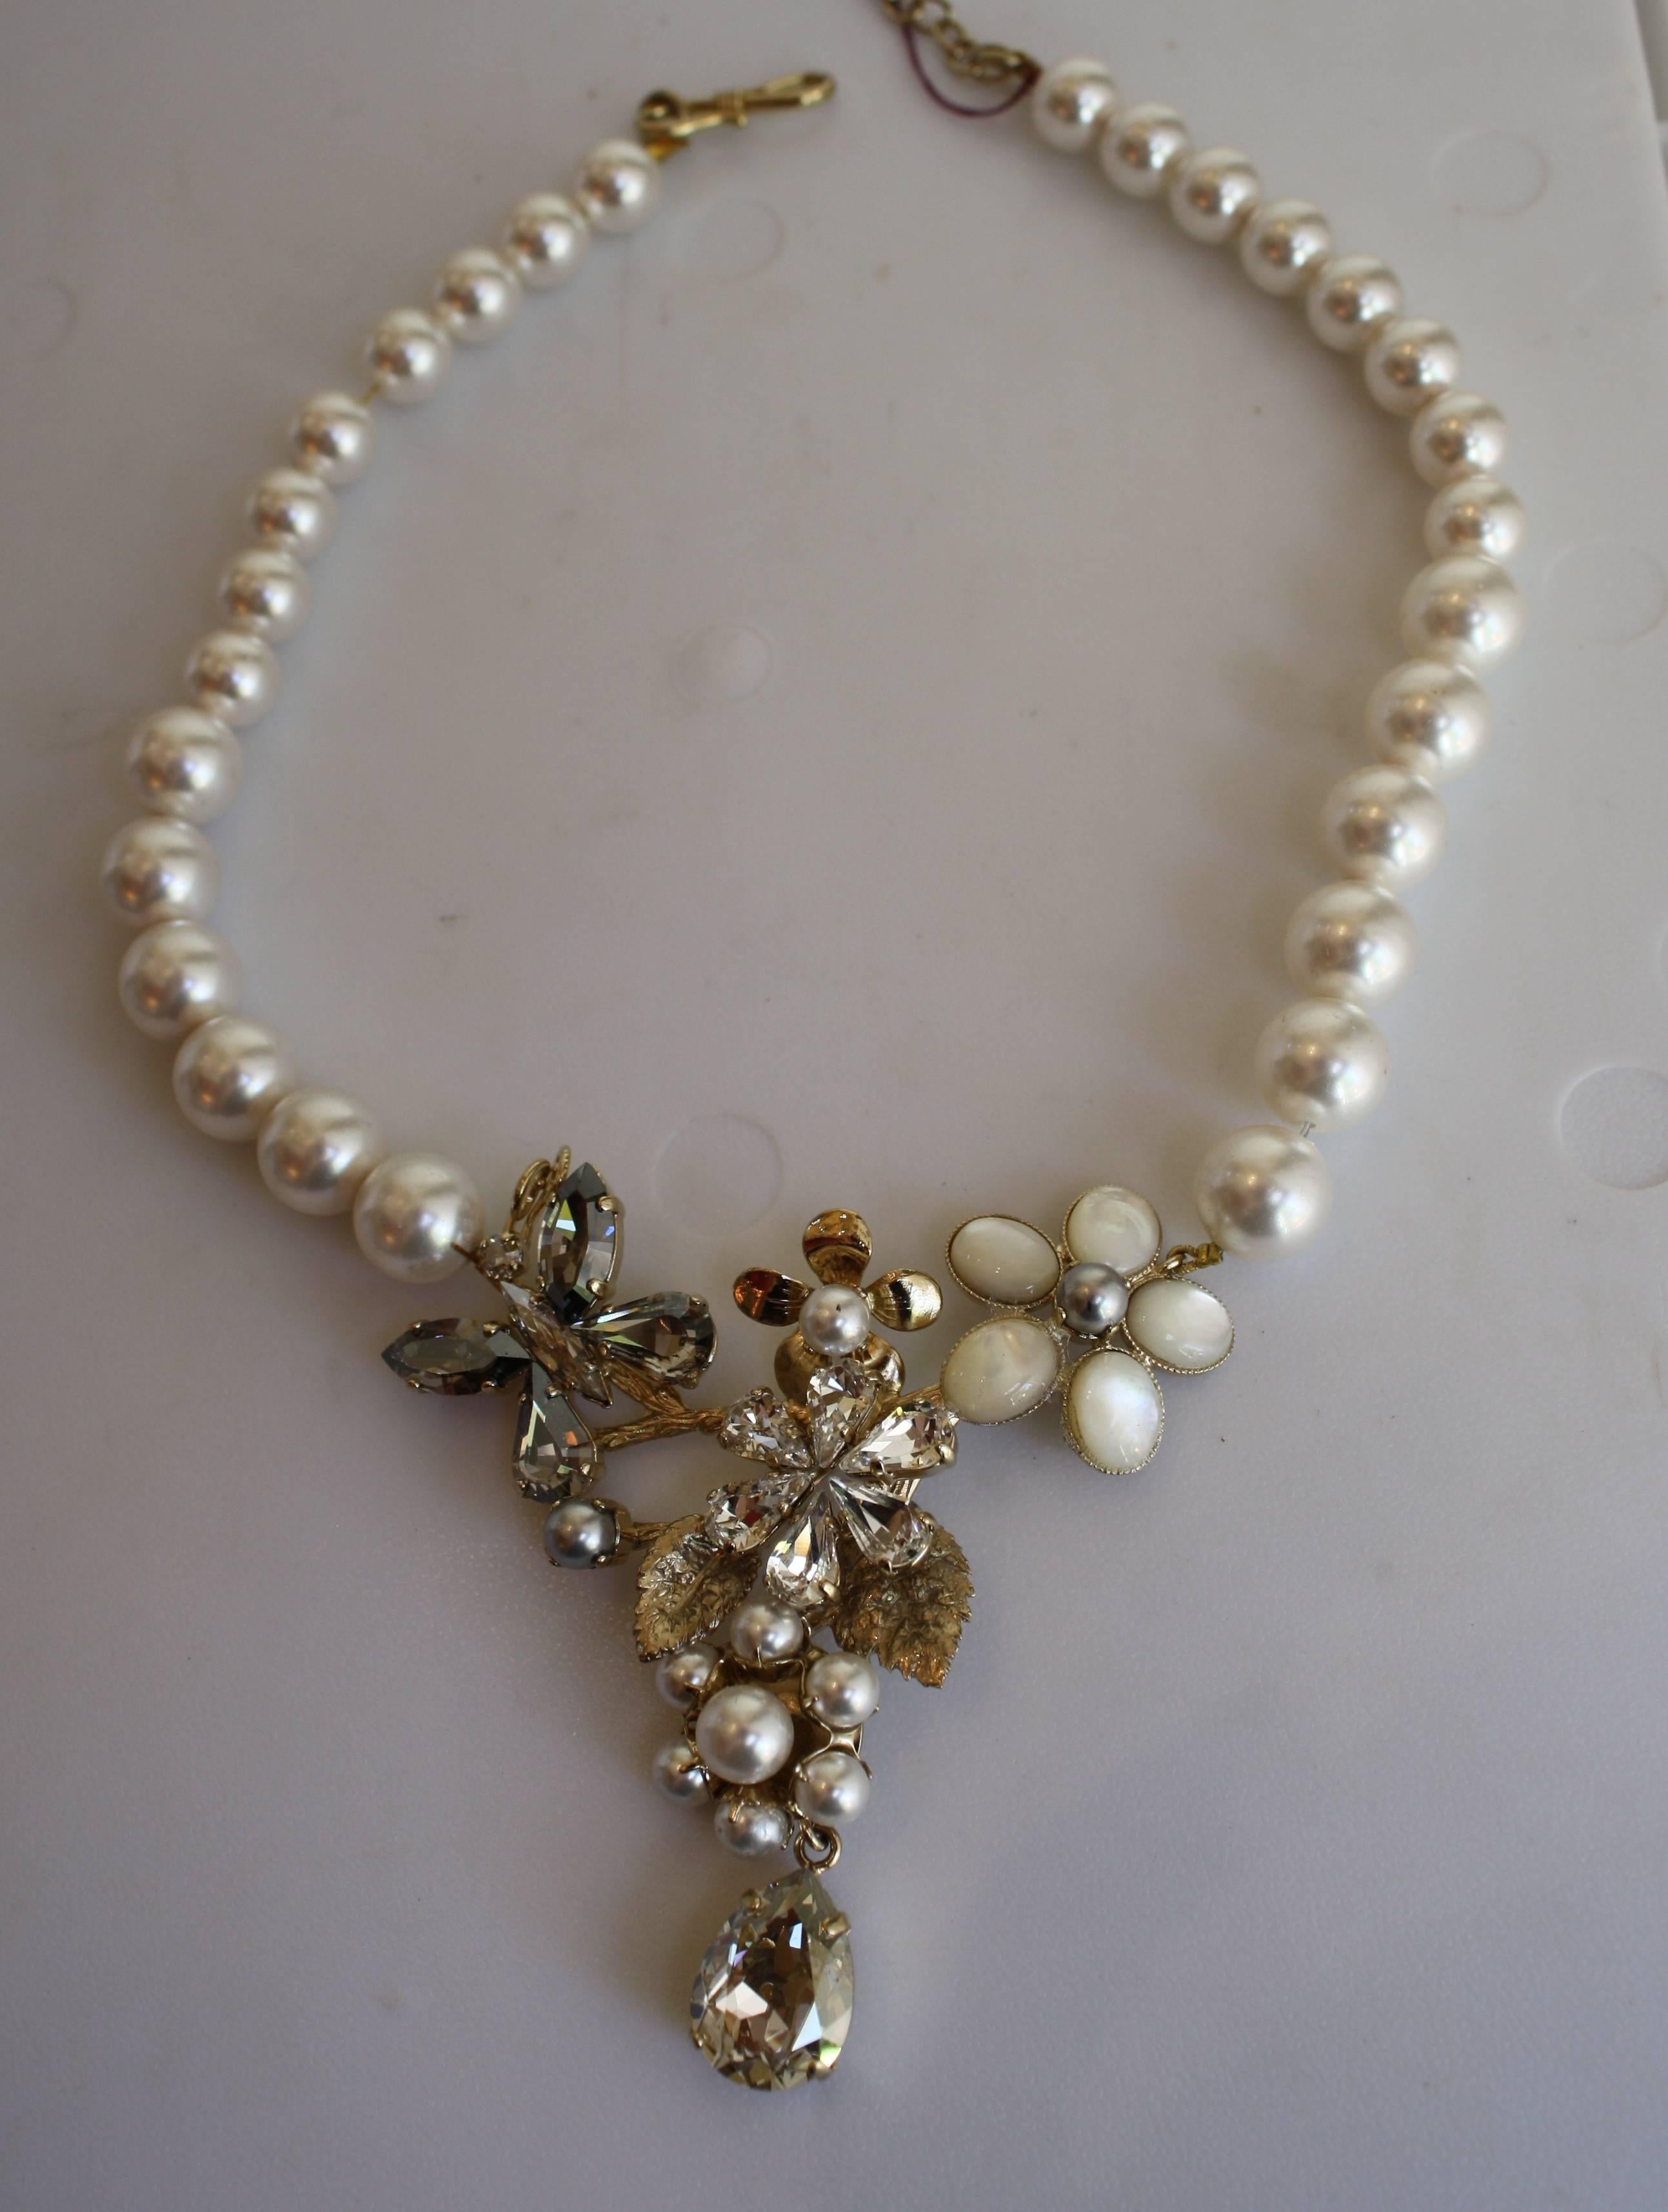 White glass pearls surround a magical mix of Swarovski crystal flowers and butterflies in this beautifully delicate necklace from Philippe Ferrandis. 

16” width with 3.25” extra chain
Motif with drops 3” long

Designer Biography:

Philippe